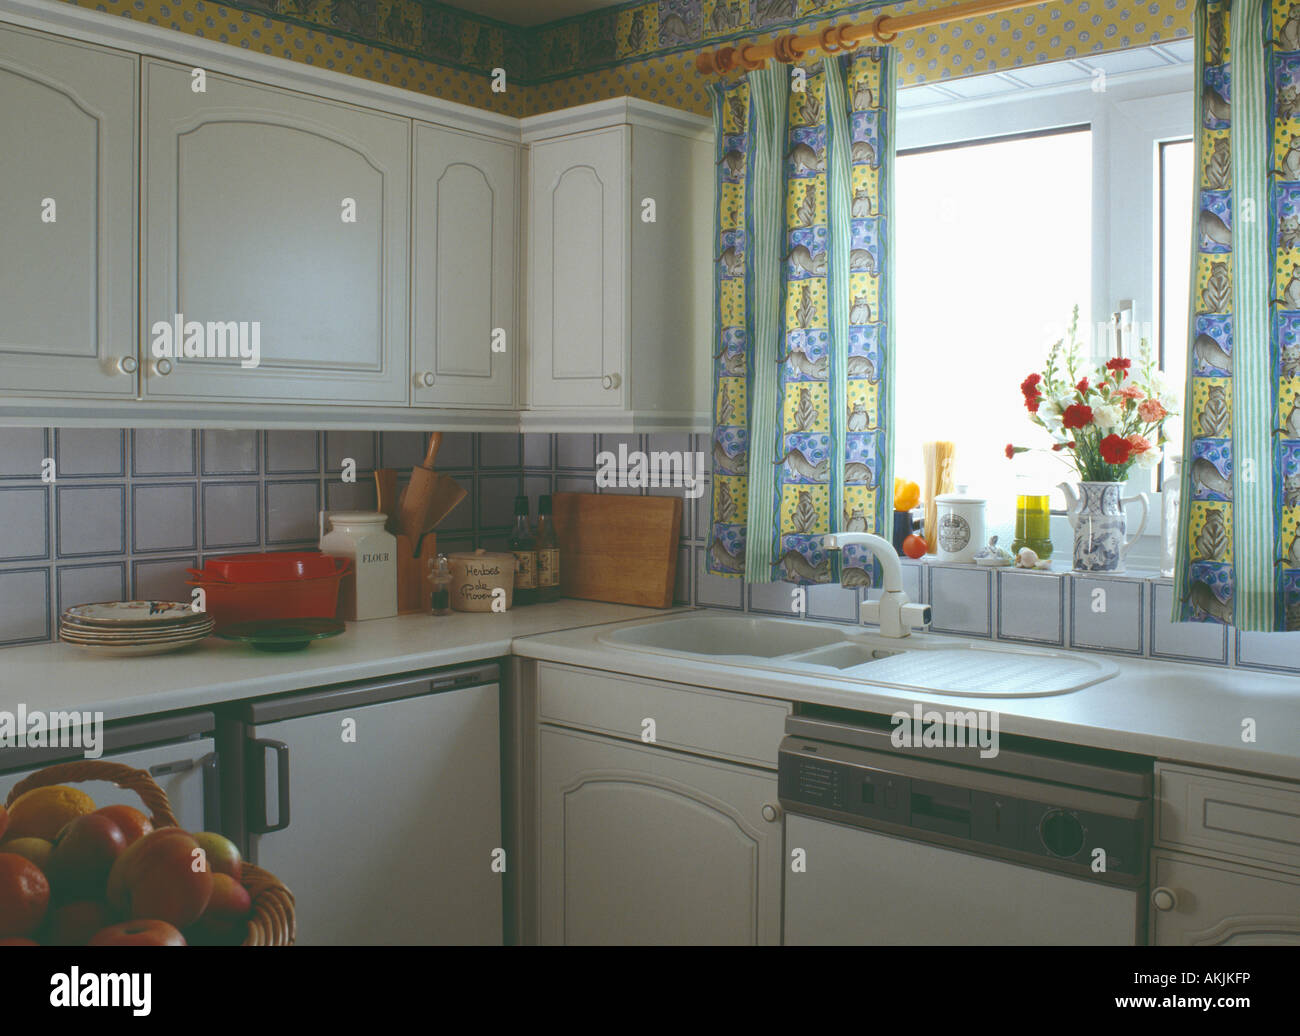 https://c8.alamy.com/comp/AKJKFP/yellow-patterned-curtains-above-white-sink-in-small-nineties-kitchen-AKJKFP.jpg